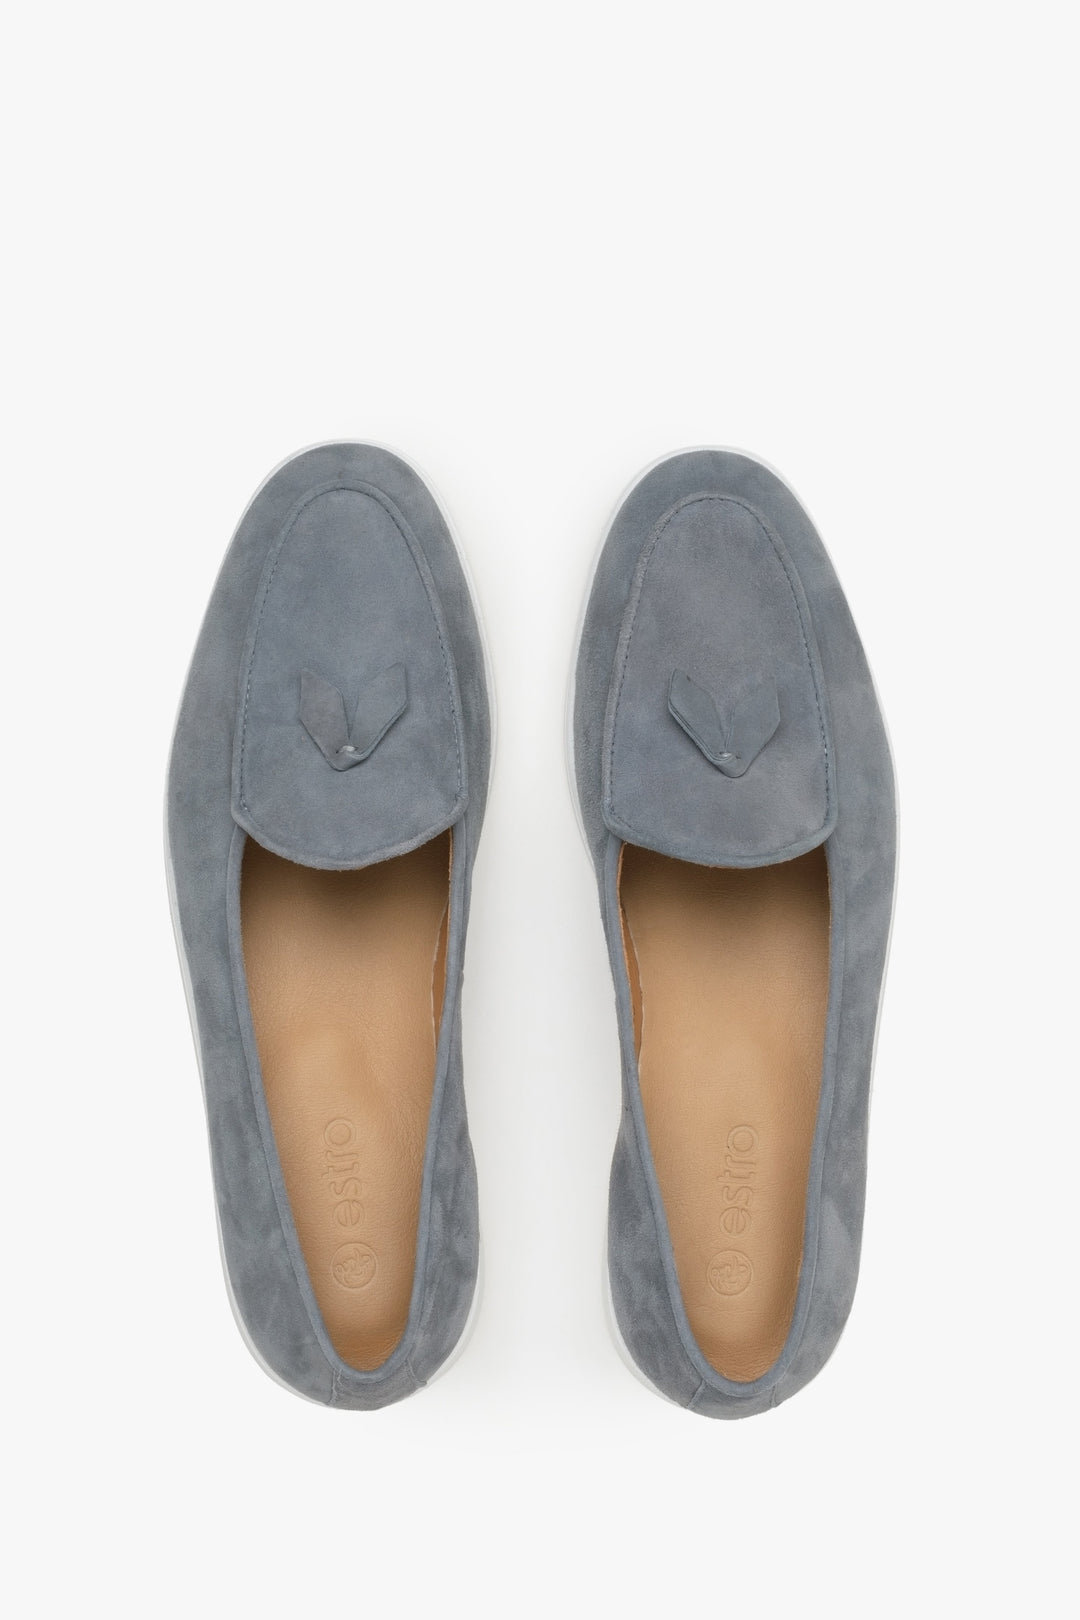 Women's grey velour moccasins by Estro - top view presentation of the model.